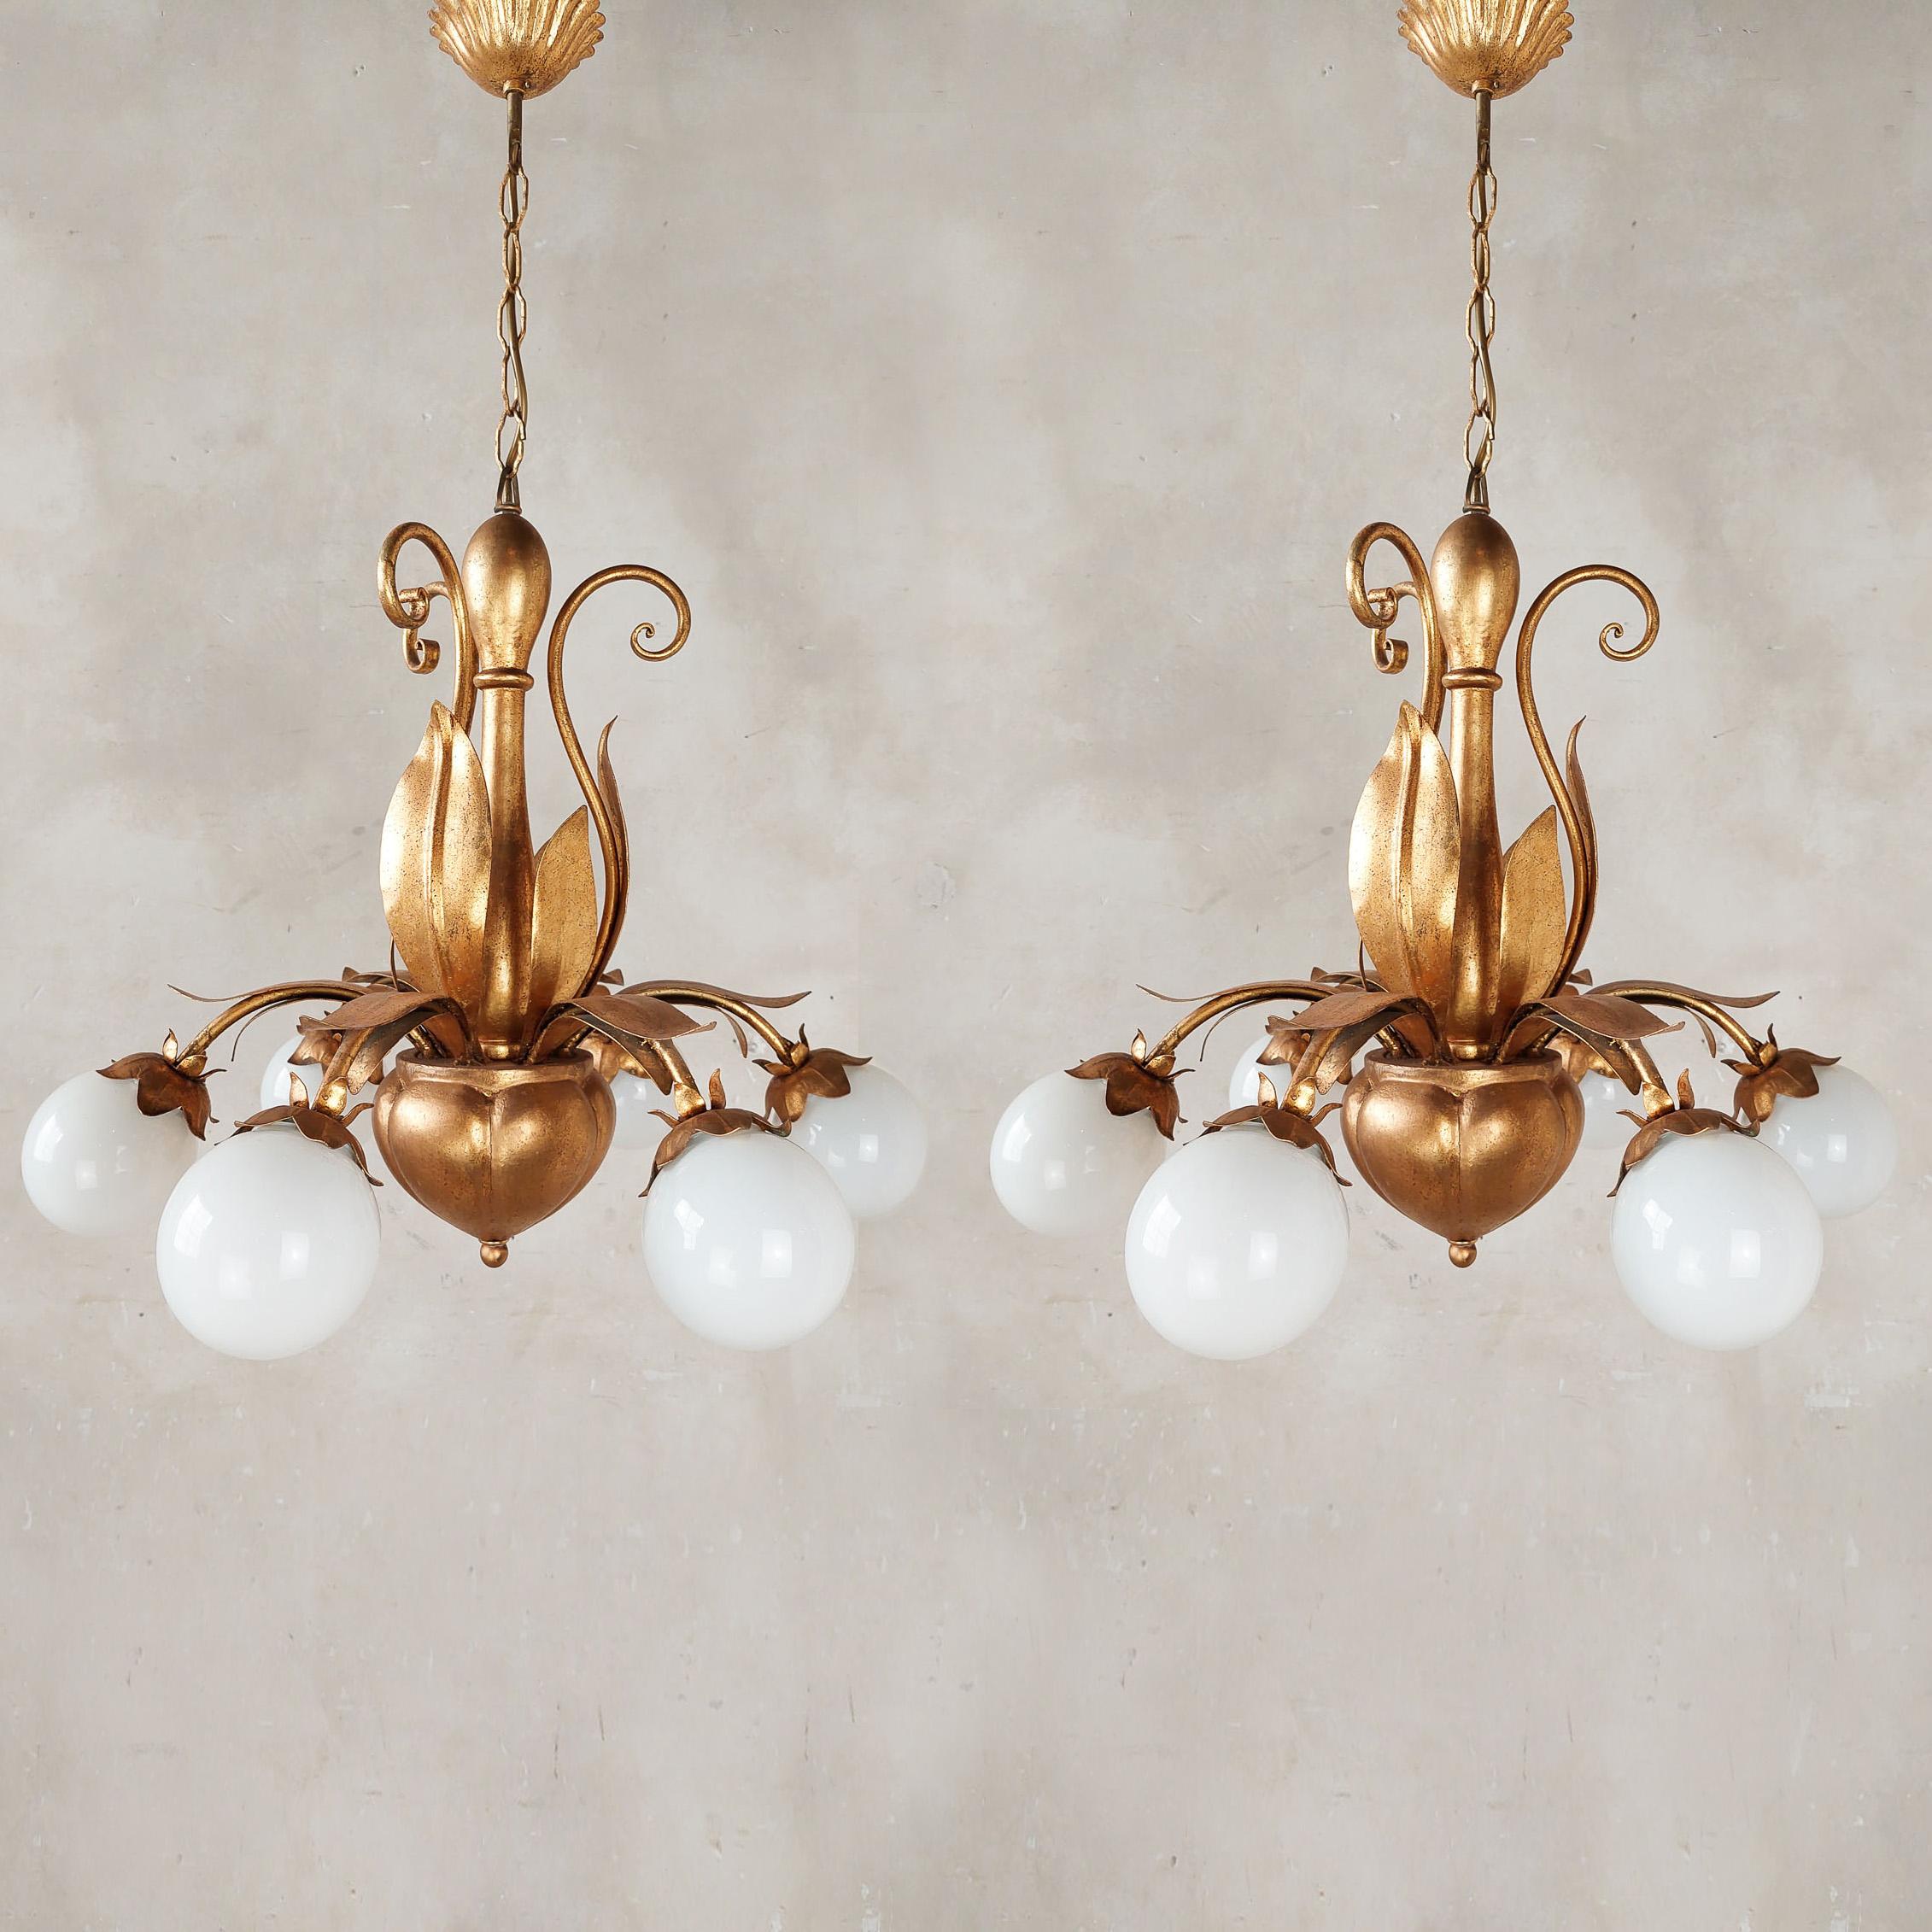 A pair of French, mid-century gold (gold patinated) Hollywood Regency lamps with leaves. The 6 light points of these chandeliers are covered with opaline glass spheres / bulb caps.

height 79 cm, diameter 55 cm

price for the pair